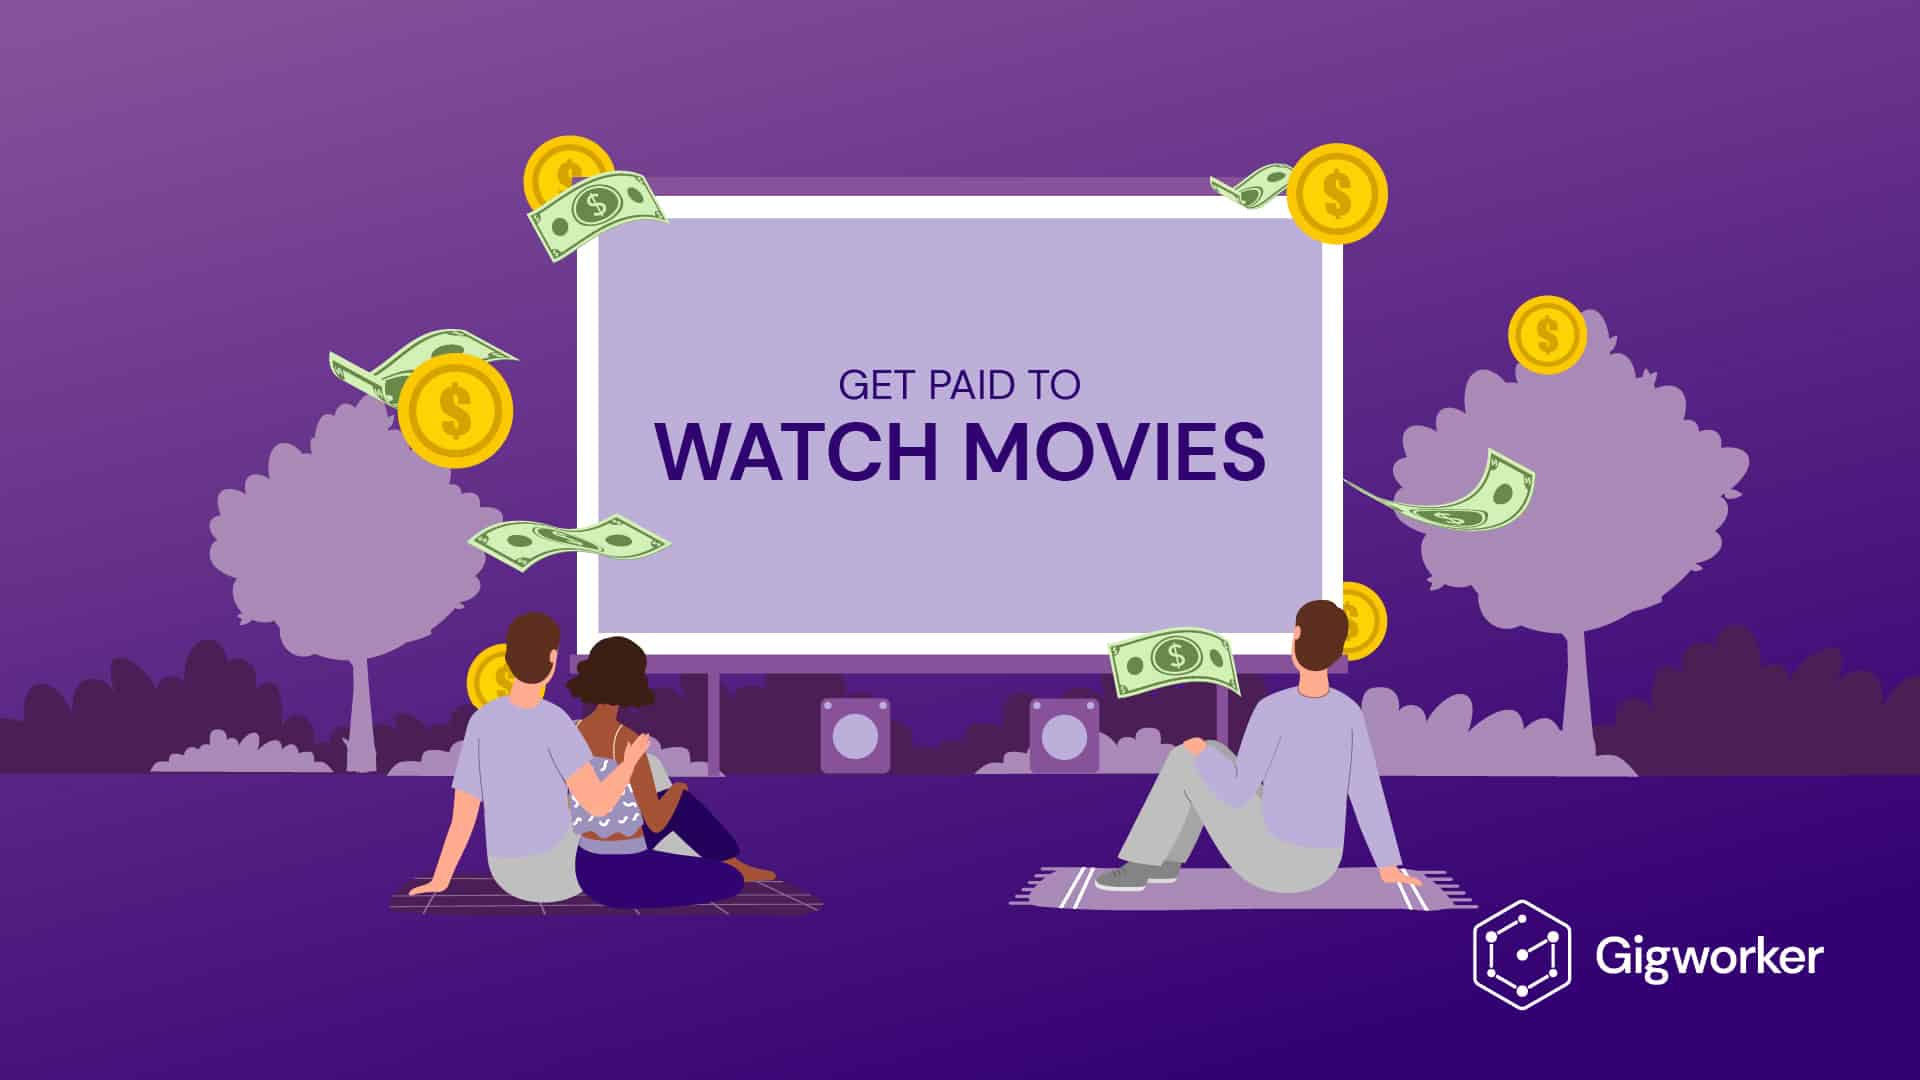 vector graphic showing an illustration of people getting paid to watch movies